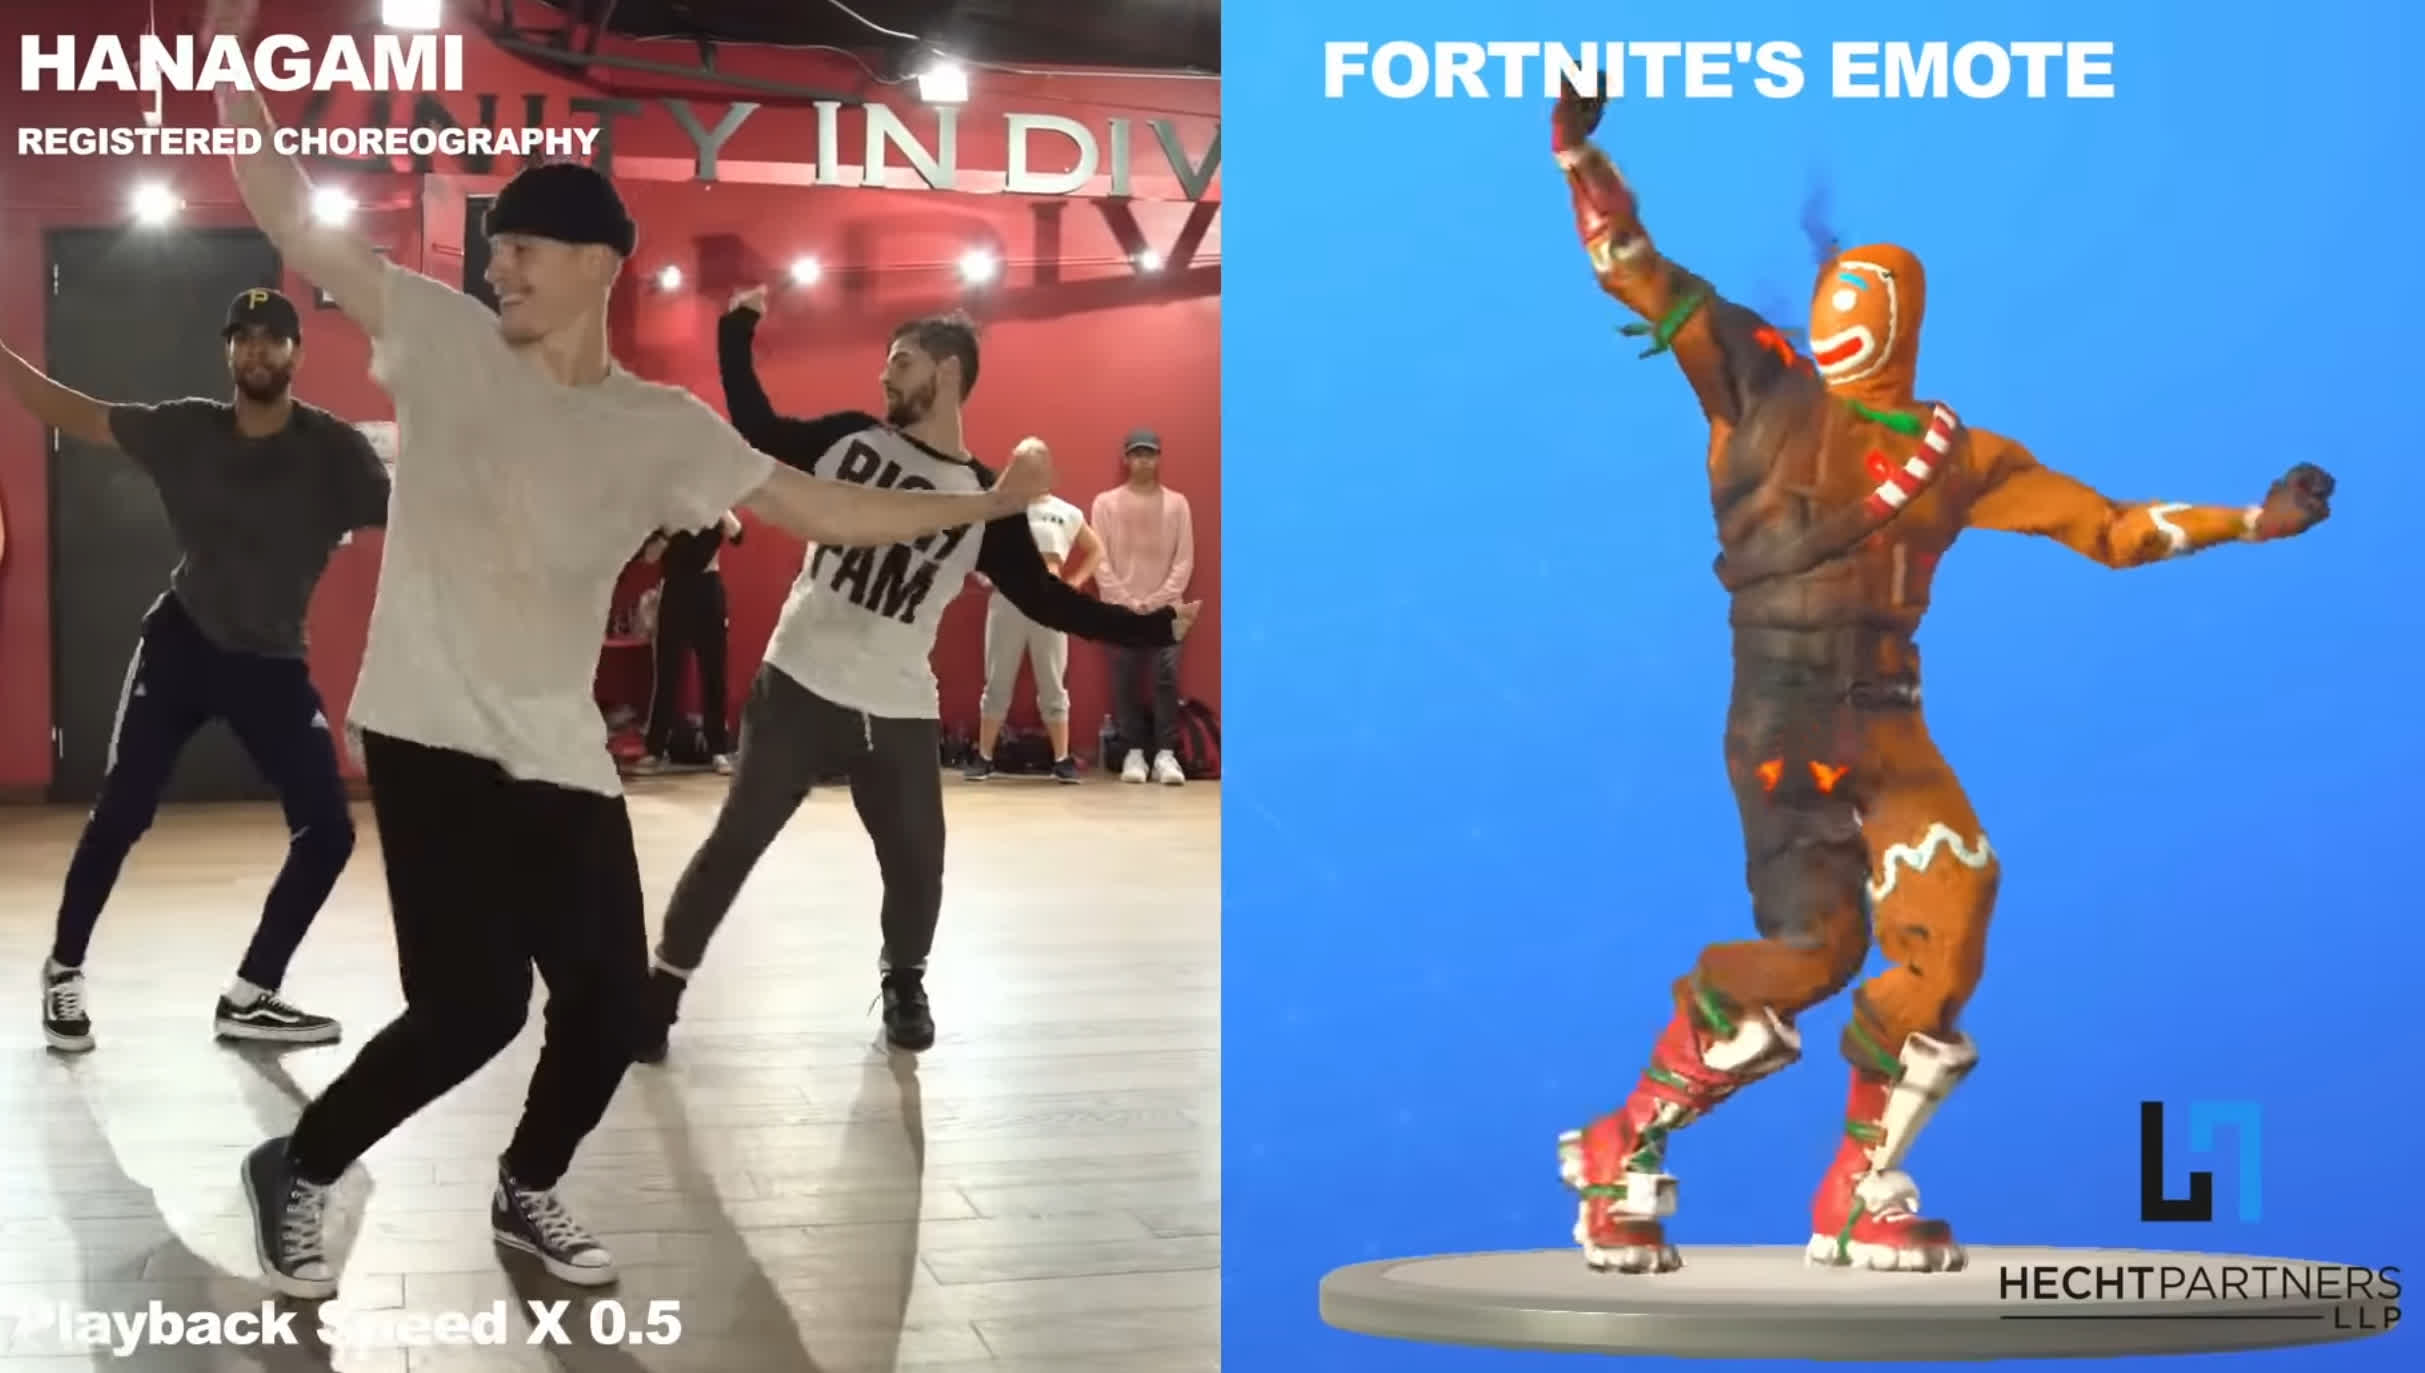 Epic Games sued by choreographer for allegedly using copyrighted dance moves in Fortnite